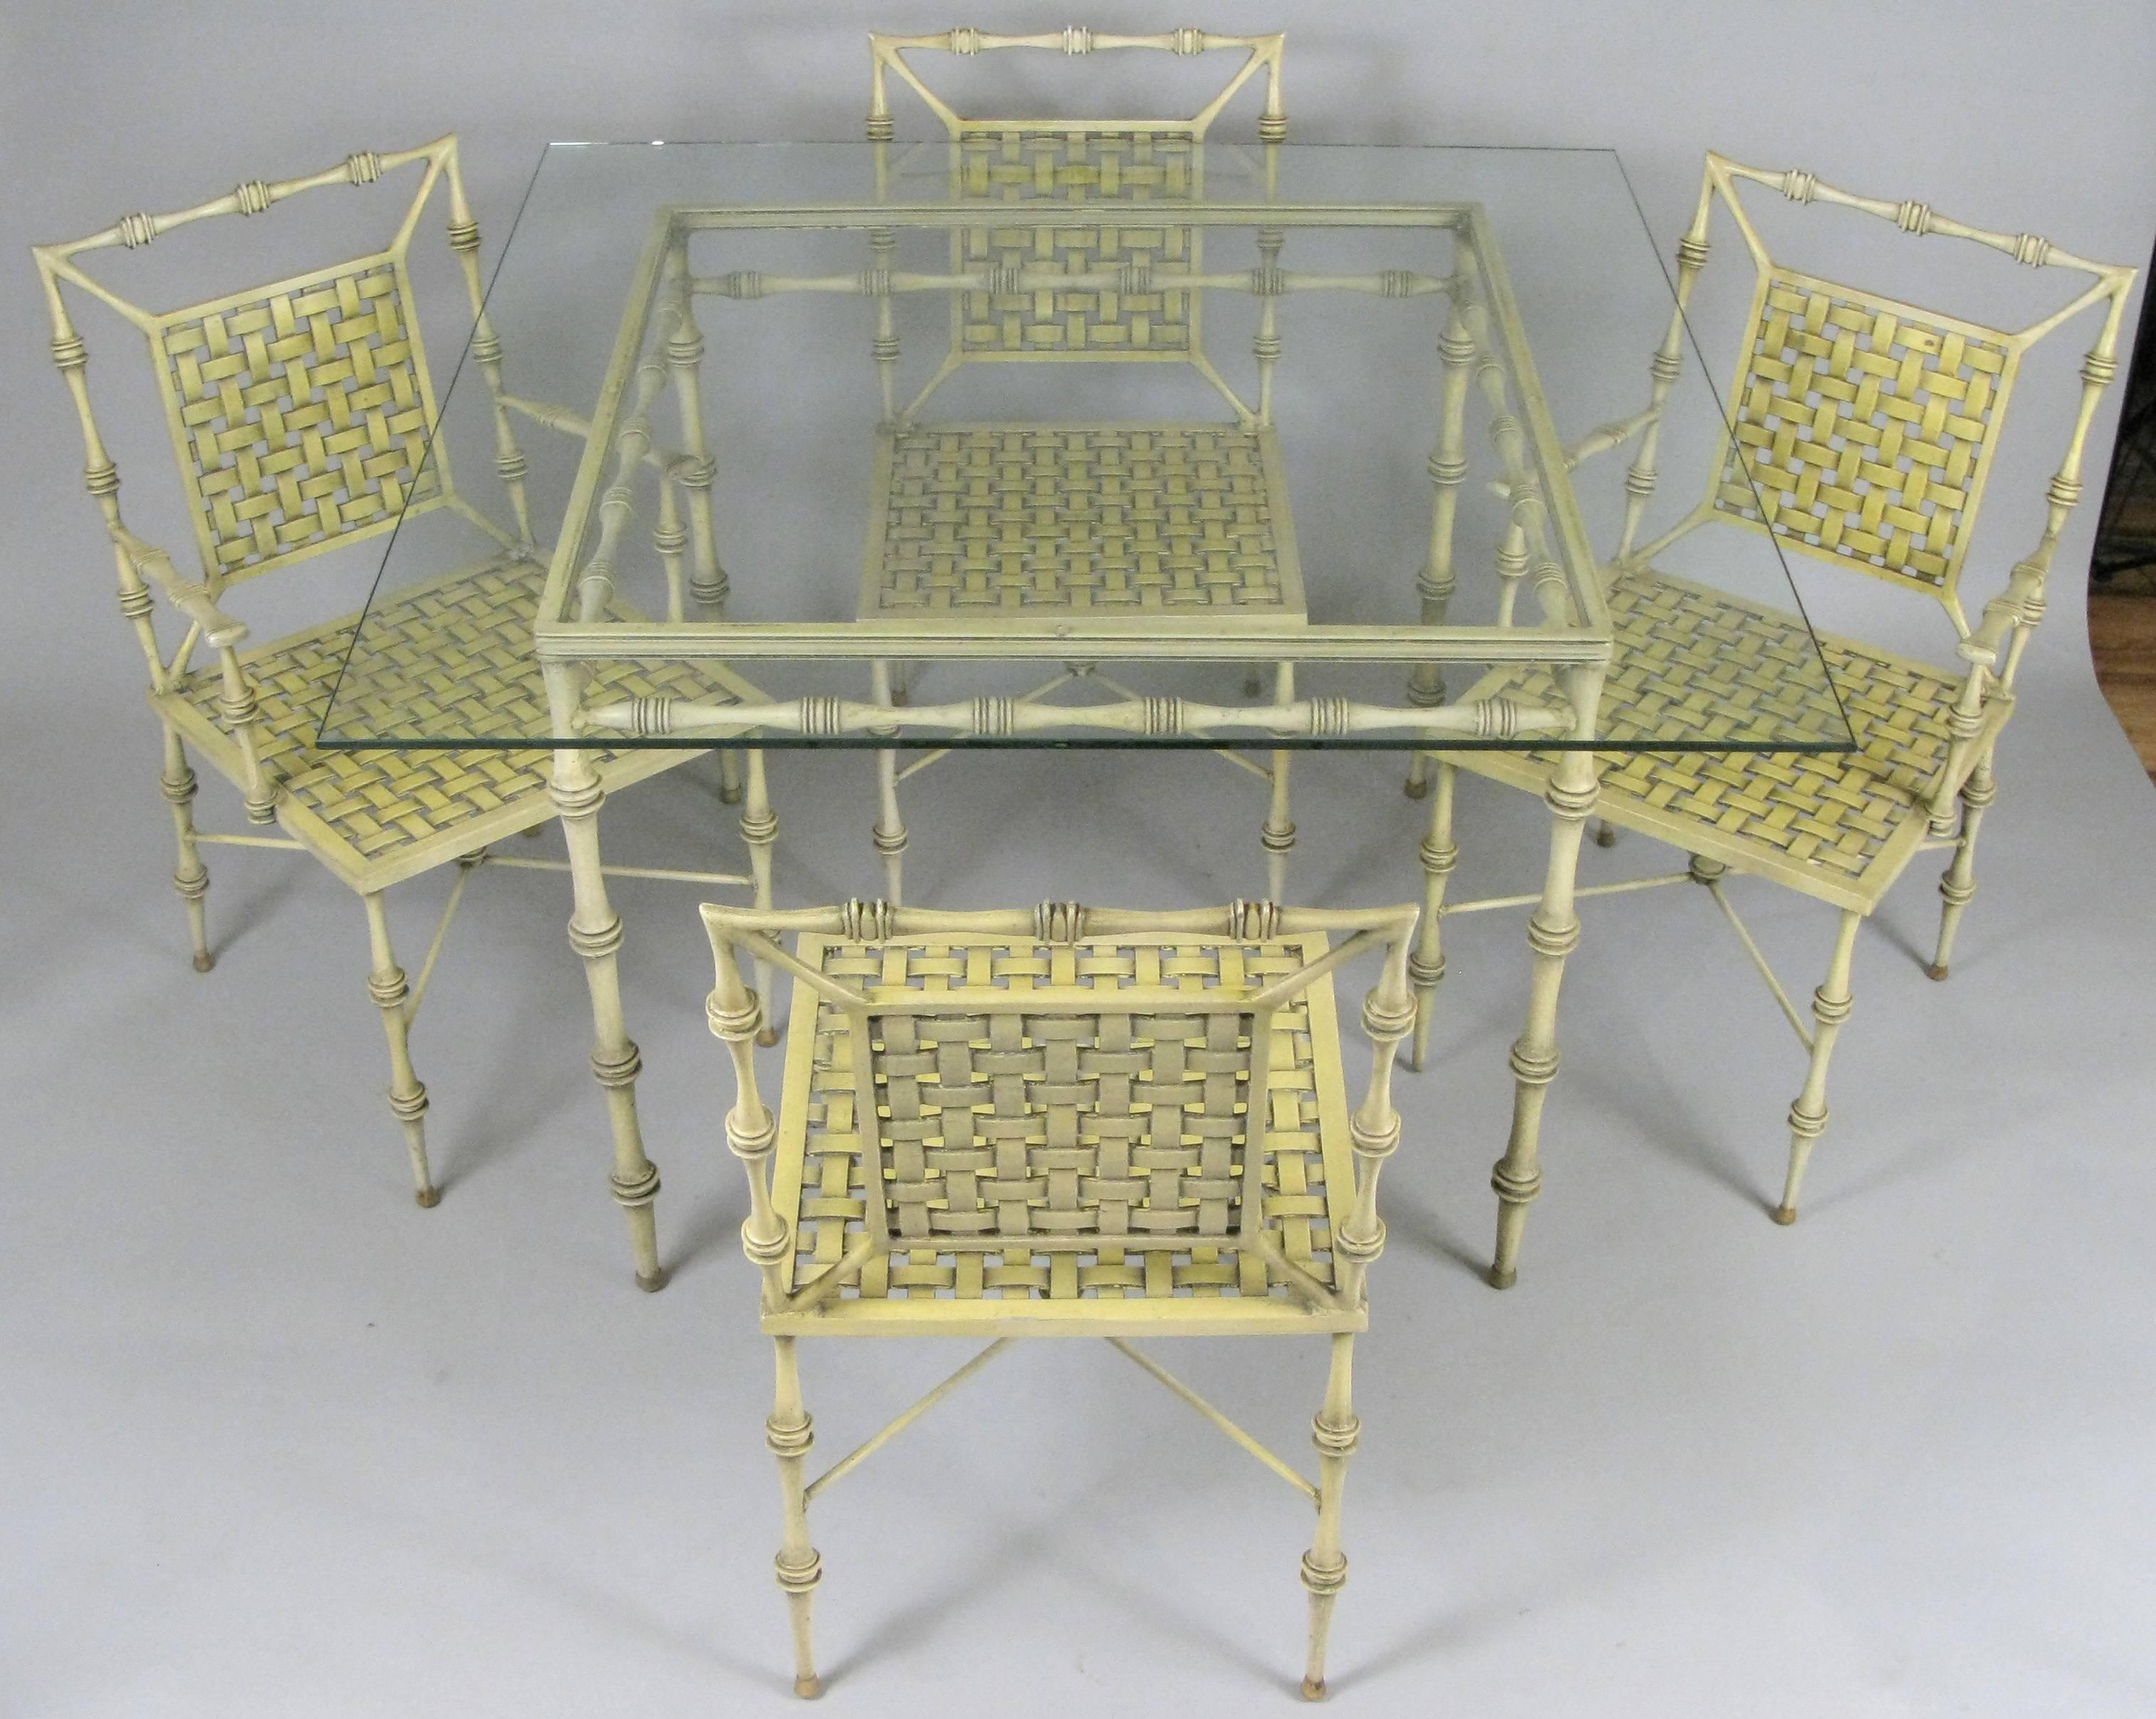 A very charming and elegant vintage 1960s aluminum dining set by Phyllis Morris, with a glass top sqaure table and a pair of armchairs and a pair of side chairs. All in their original finish which is a pale yellow with dark beige in the rececsses of